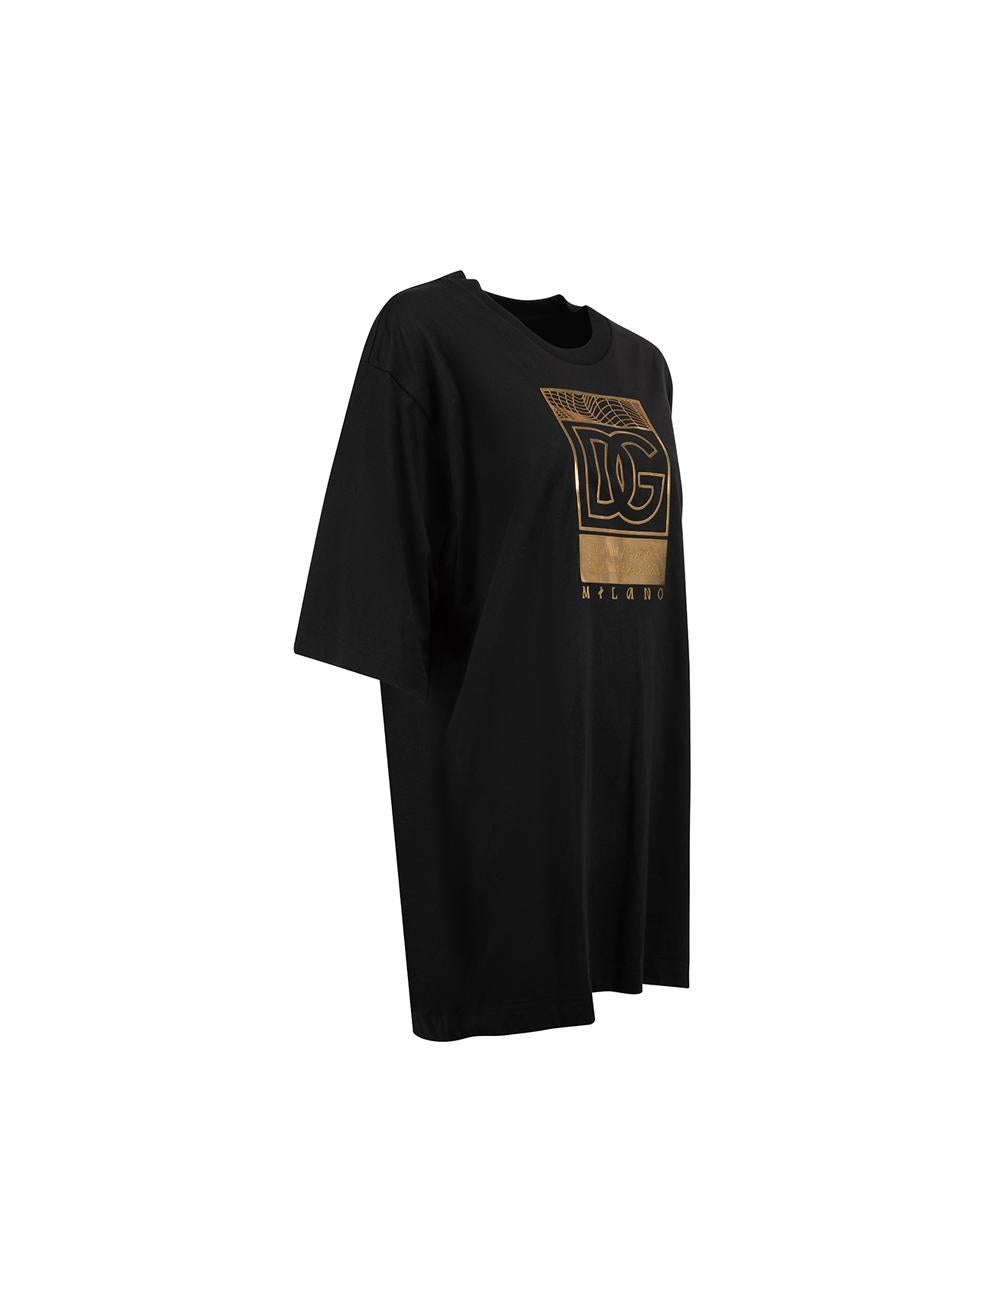 CONDITION is Never worn, with tags. No visible wear to t-shirt is evident on this new Dolce & Gabbana designer resale item.



Details


Unisex

Black

Cotton

Short sleeves t-shirt

Oversized fit

Round neckline

Gold tone Realtà Parallela